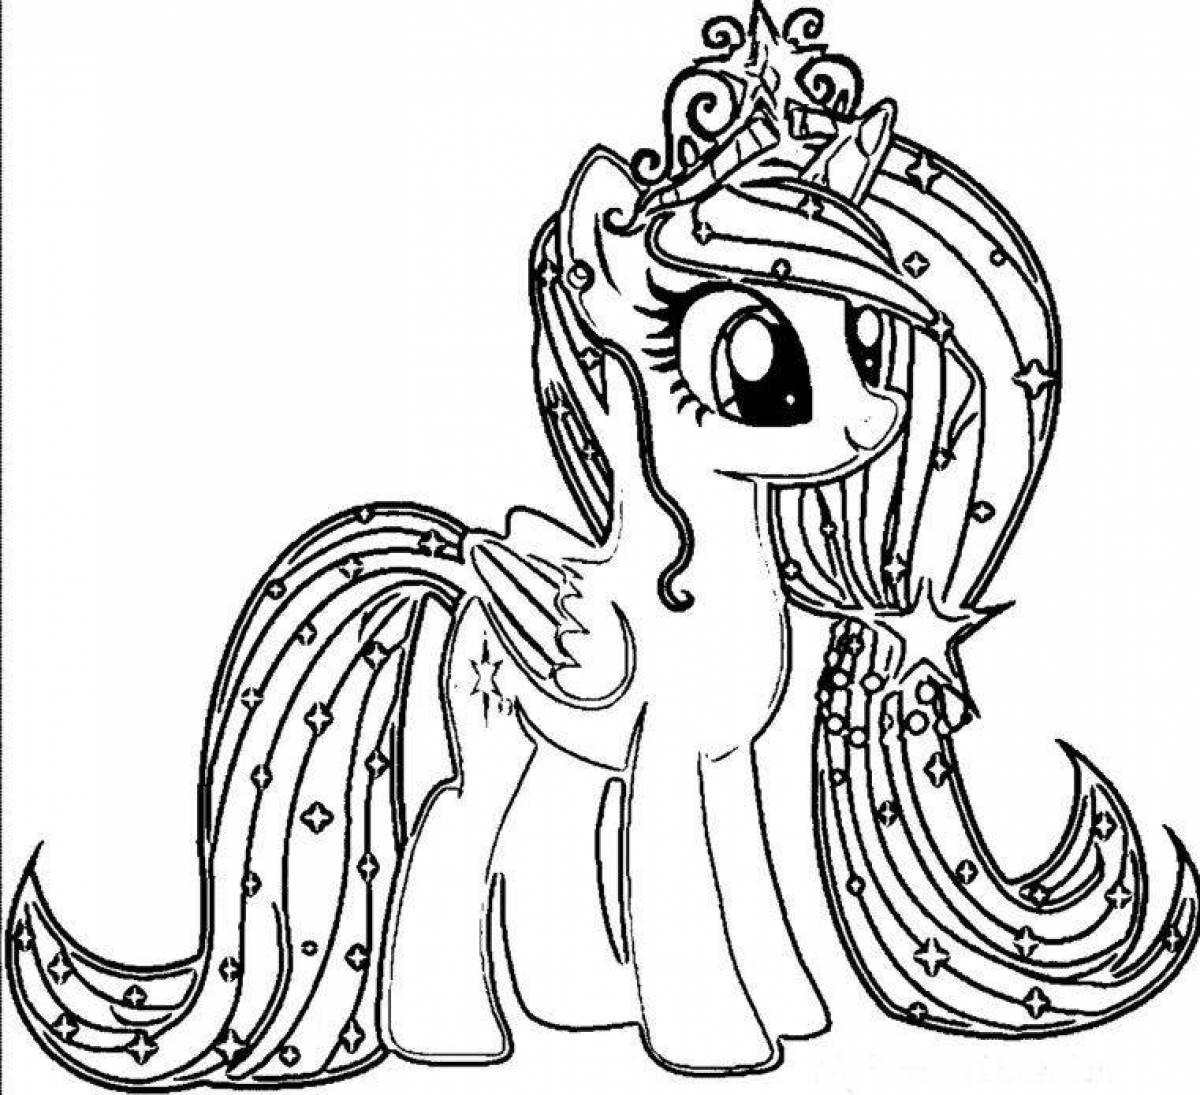 Rampant May Little pony coloring book